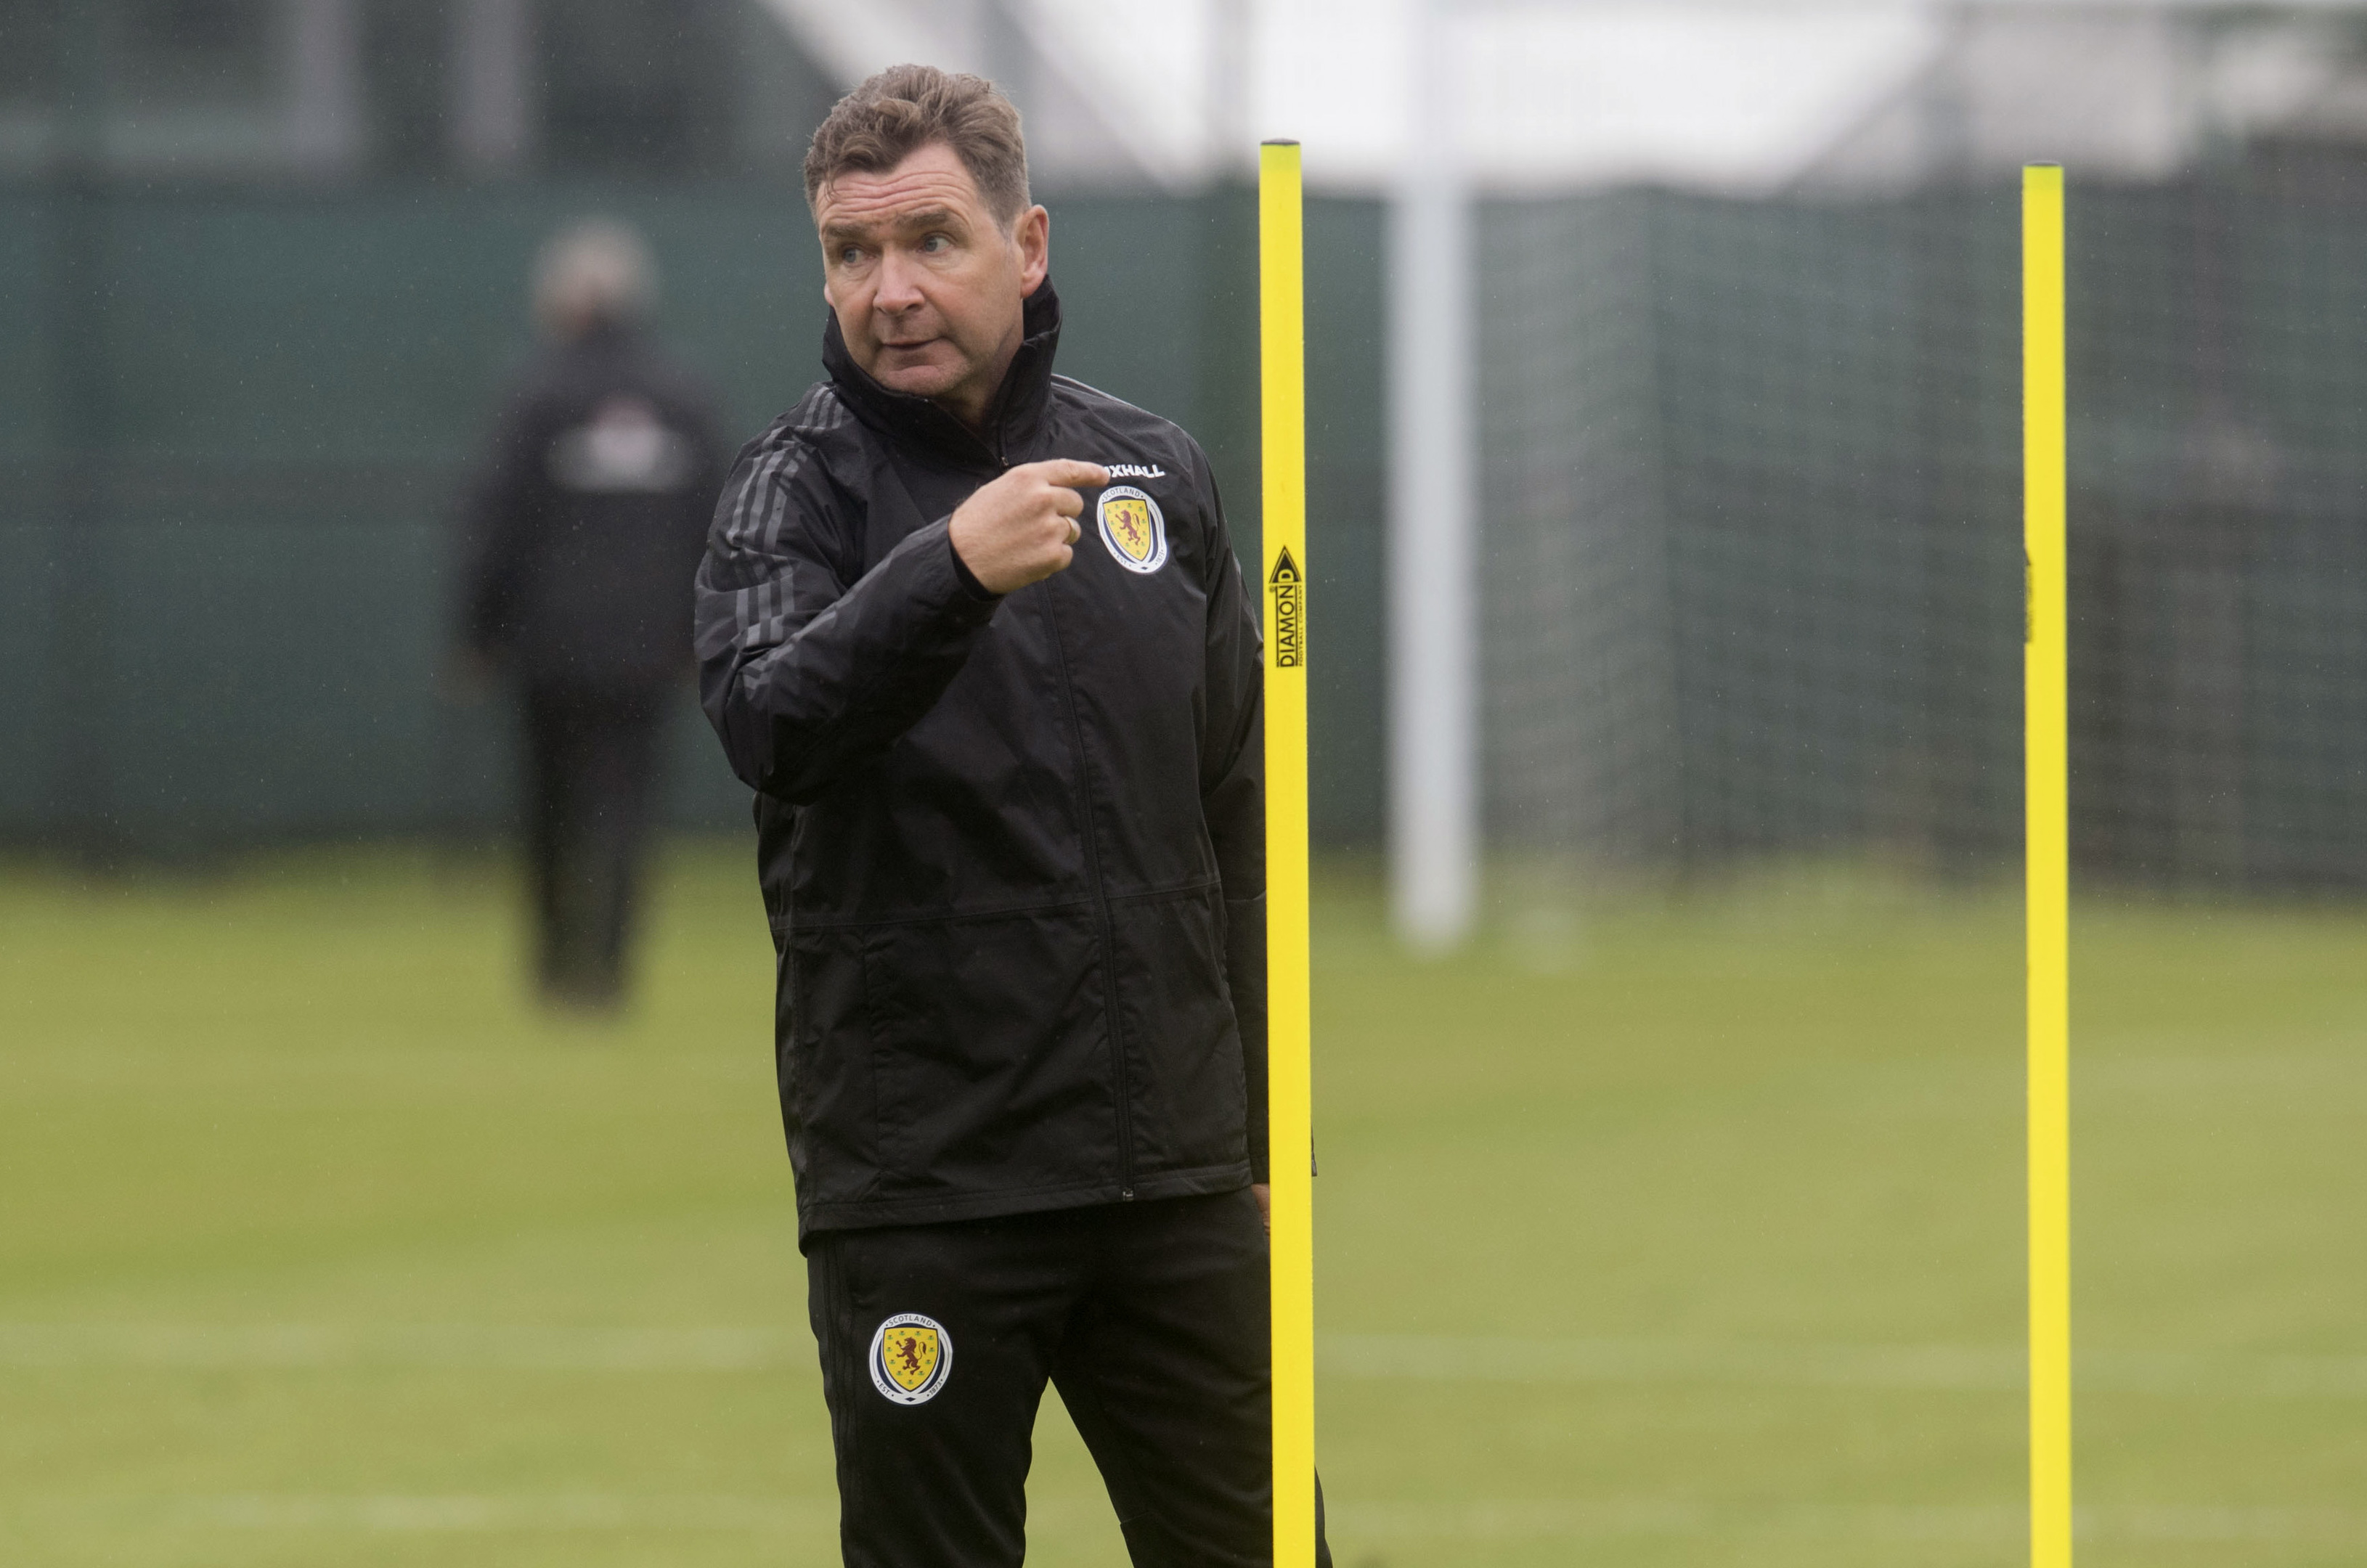 Scotland assistant manager Peter Grant sees the Nations League as an ideal chance to qualify for Euro 2020.